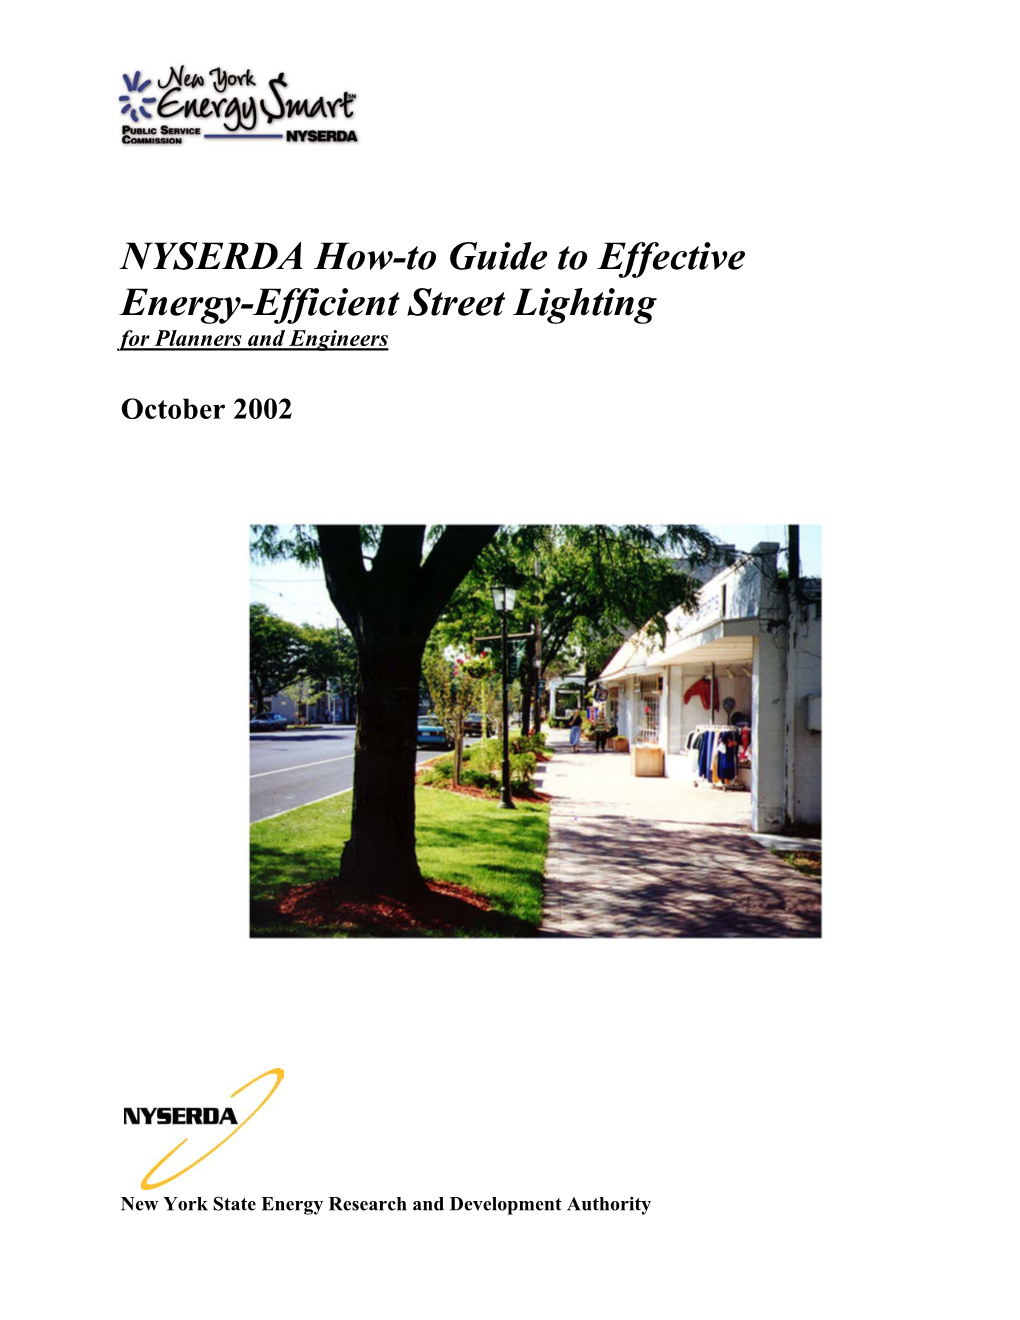 NYSERDA How-To Guide to Effective Energy-Efficient Street Lighting for Planners and Engineers